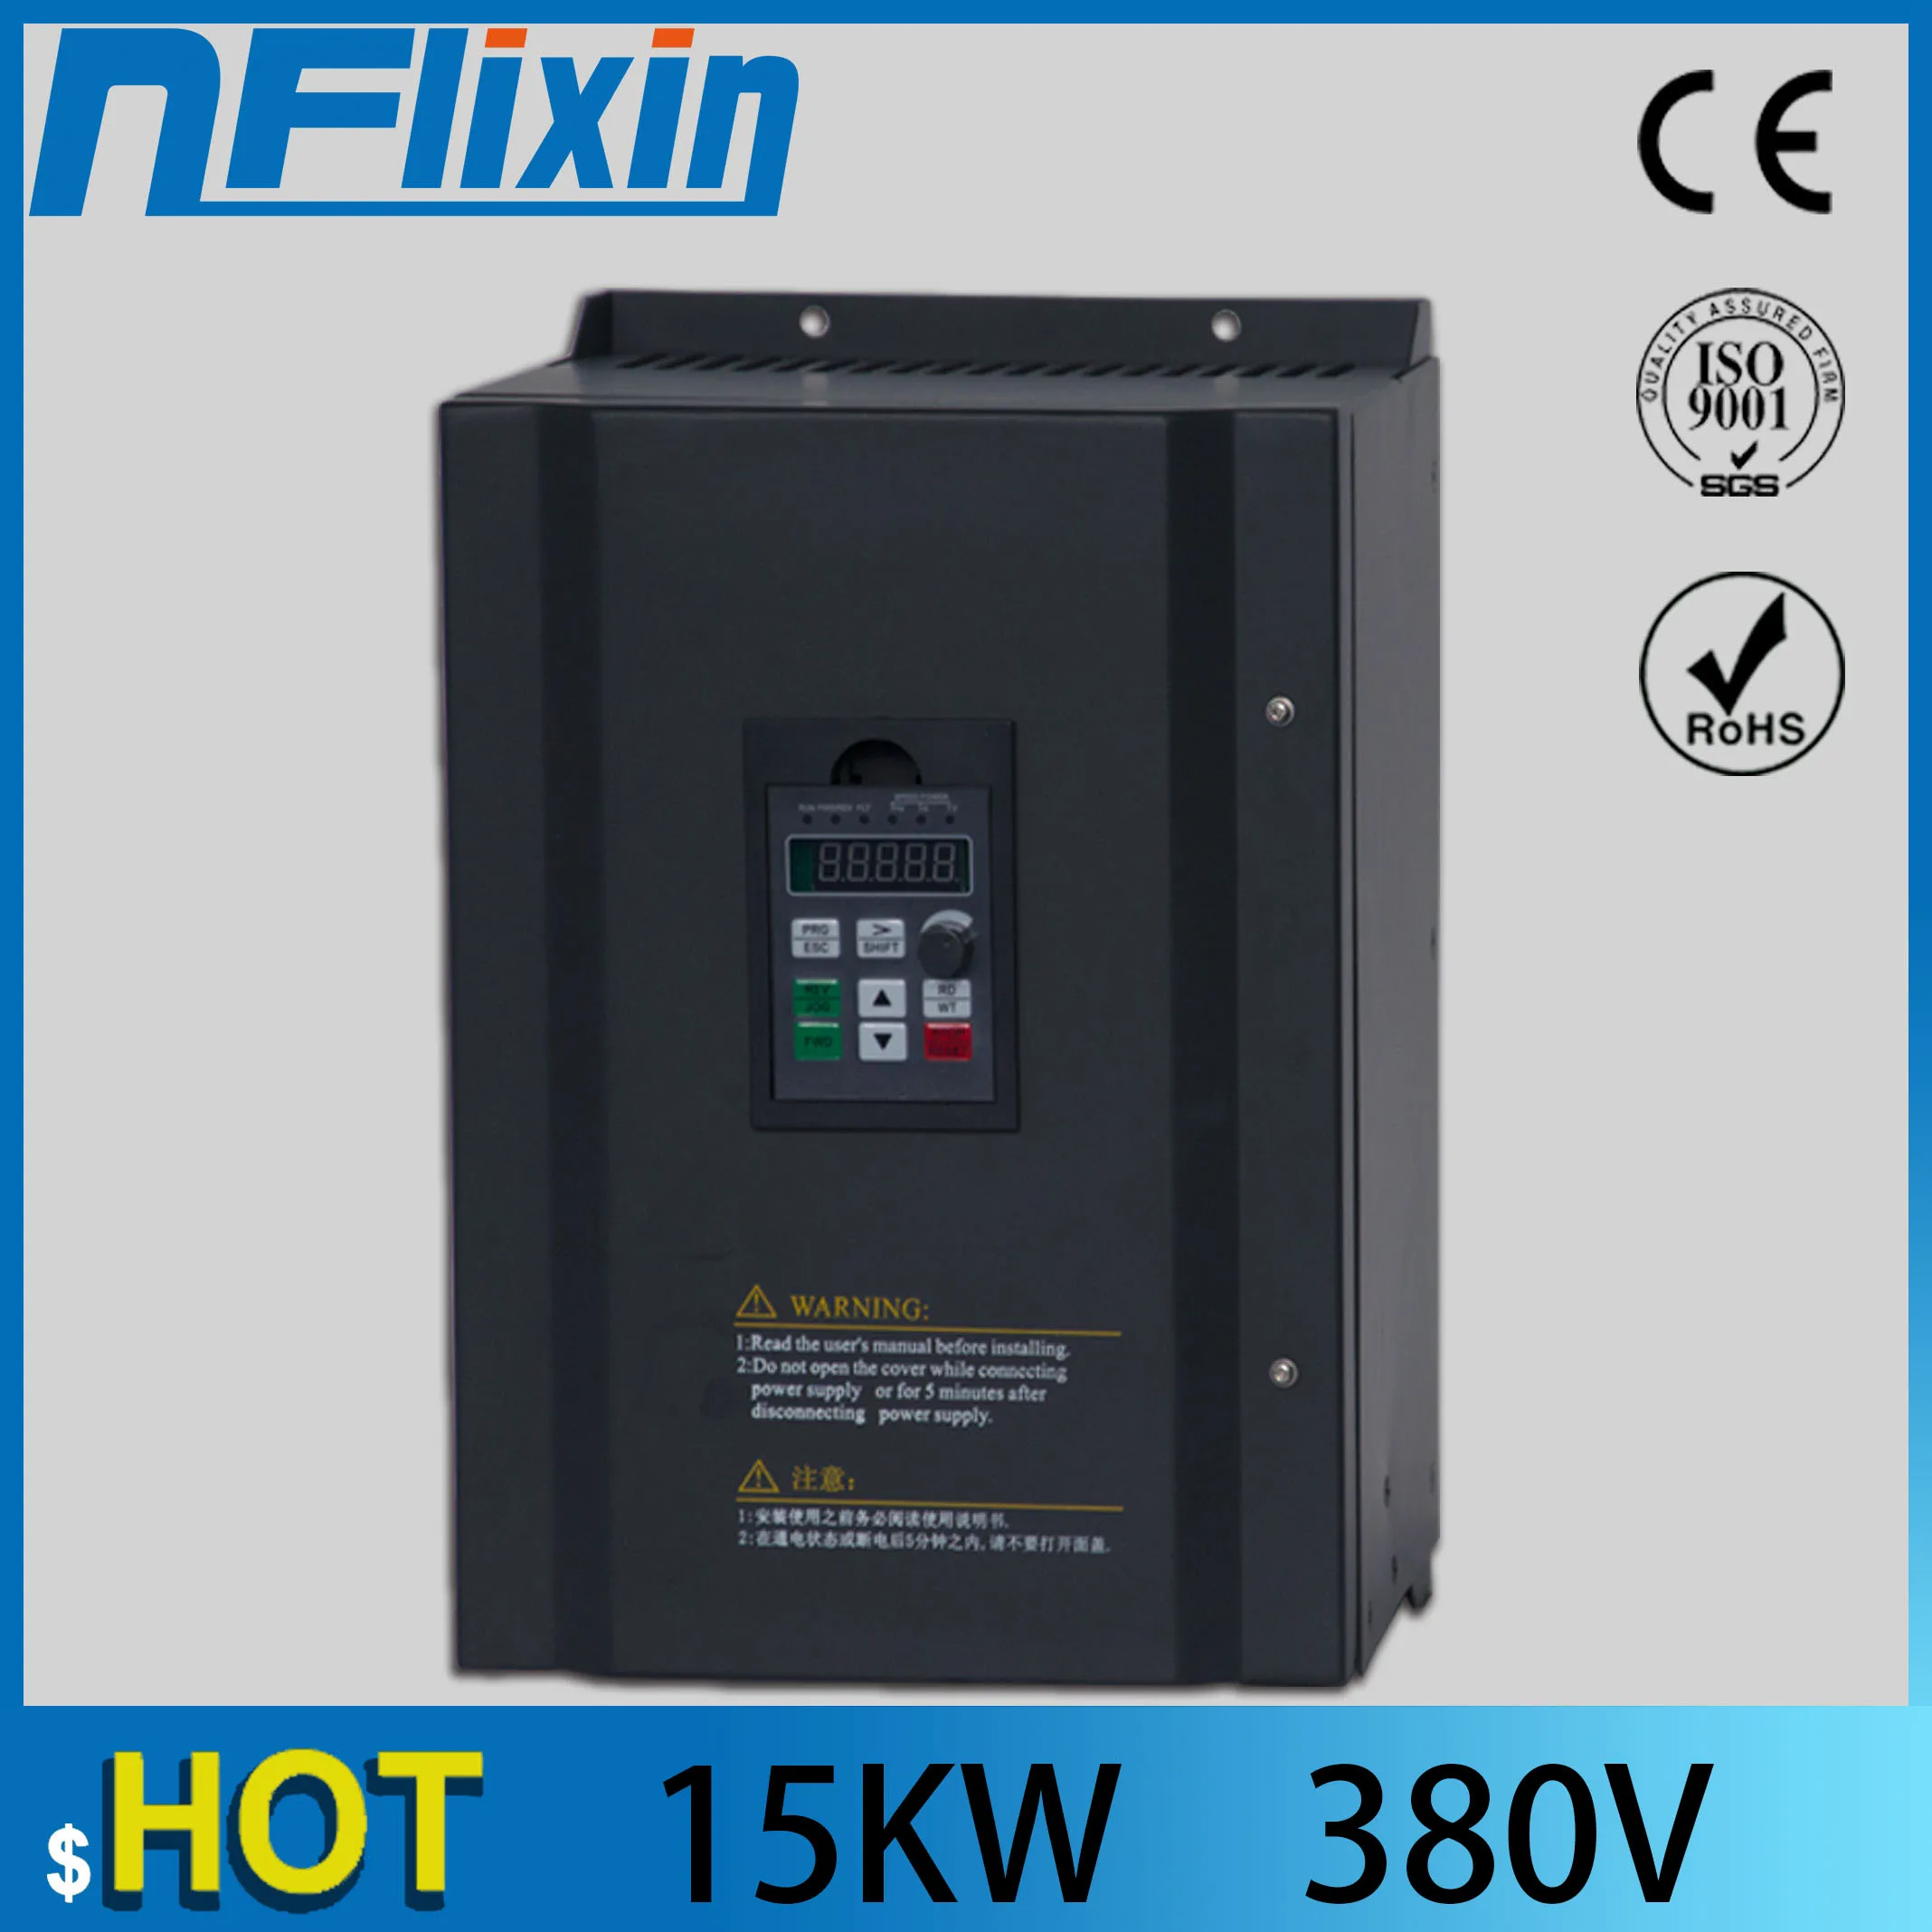 

15KW 380V 3Phase Input 32A Frequency Inverter Triphase 3 Phase Output VFD Frequency Converter Motor Speed Controller 50/60Hz